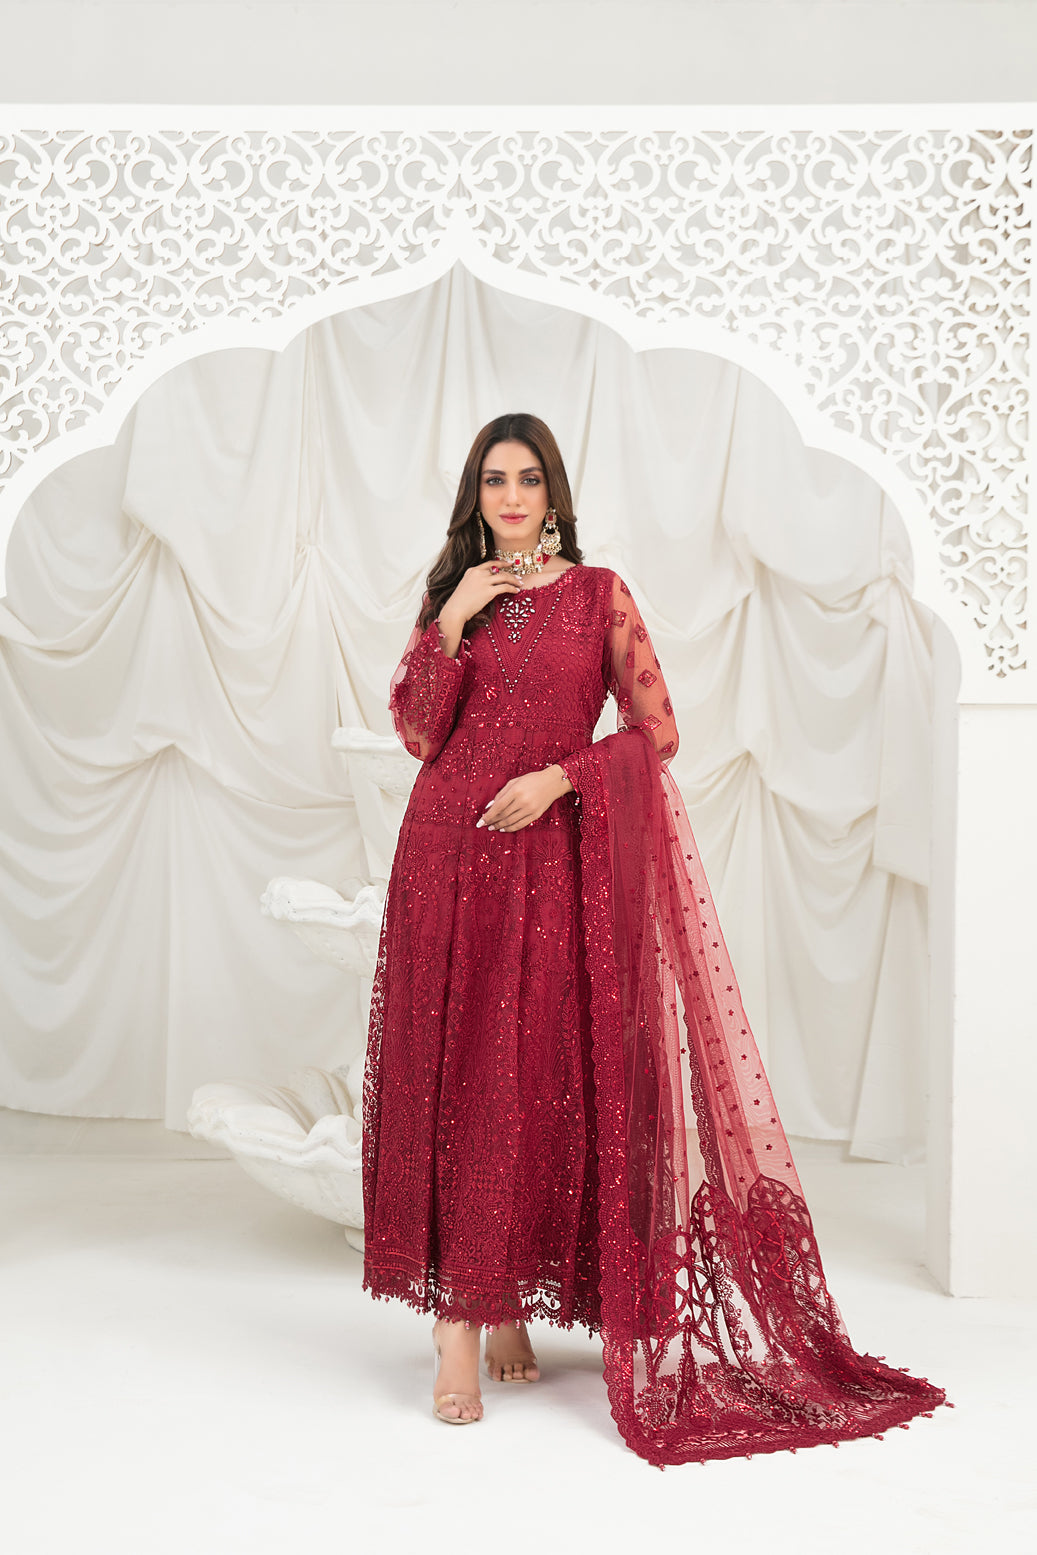 Tawakkal Fabrics 3 Piece Stitched Fancy Heavy Embroidered Net Suit - D-1215